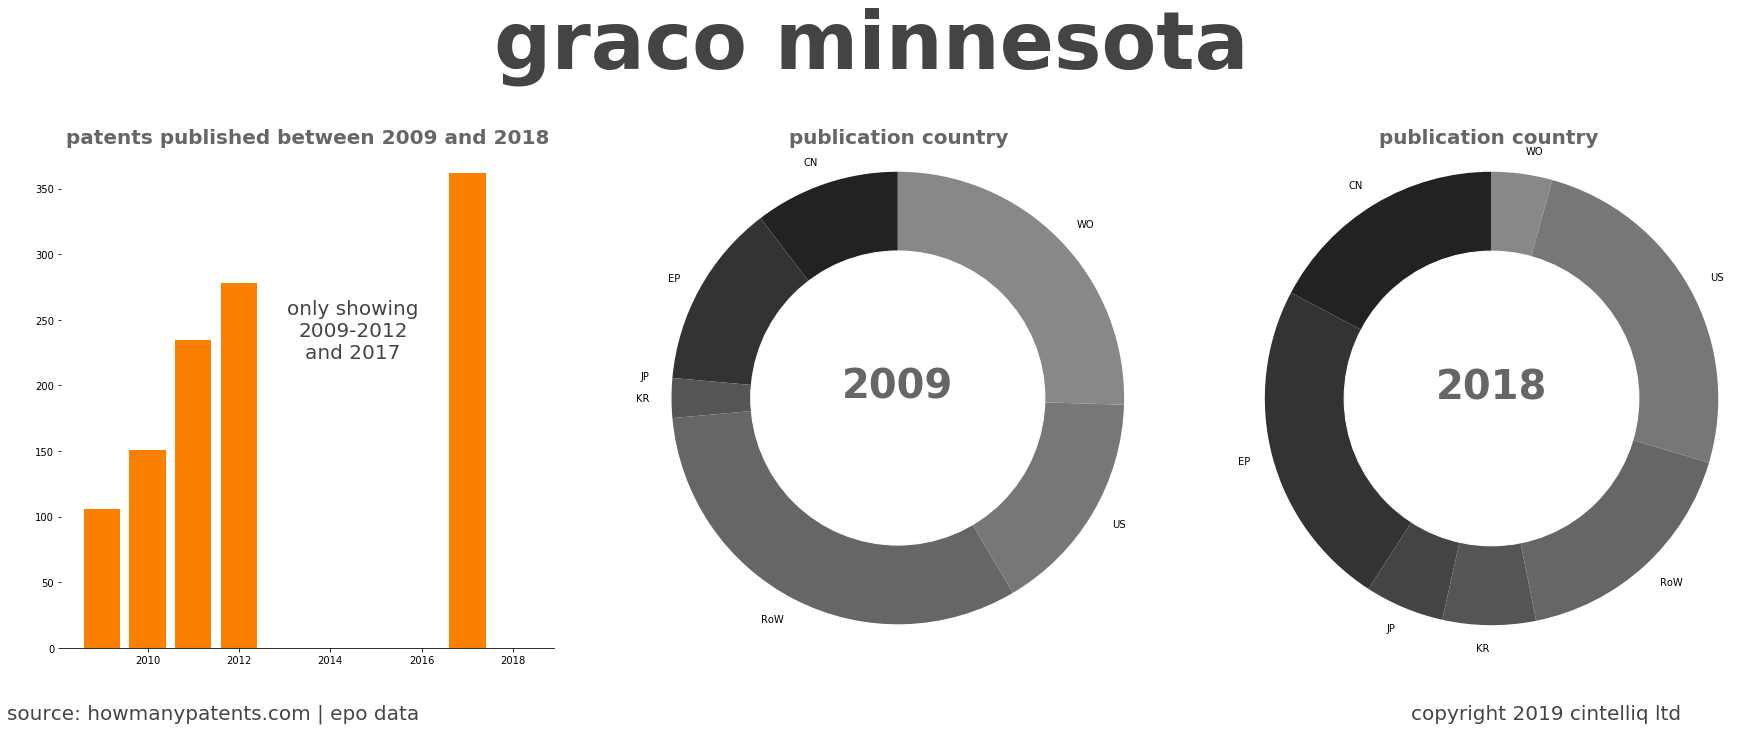 summary of patents for Graco Minnesota